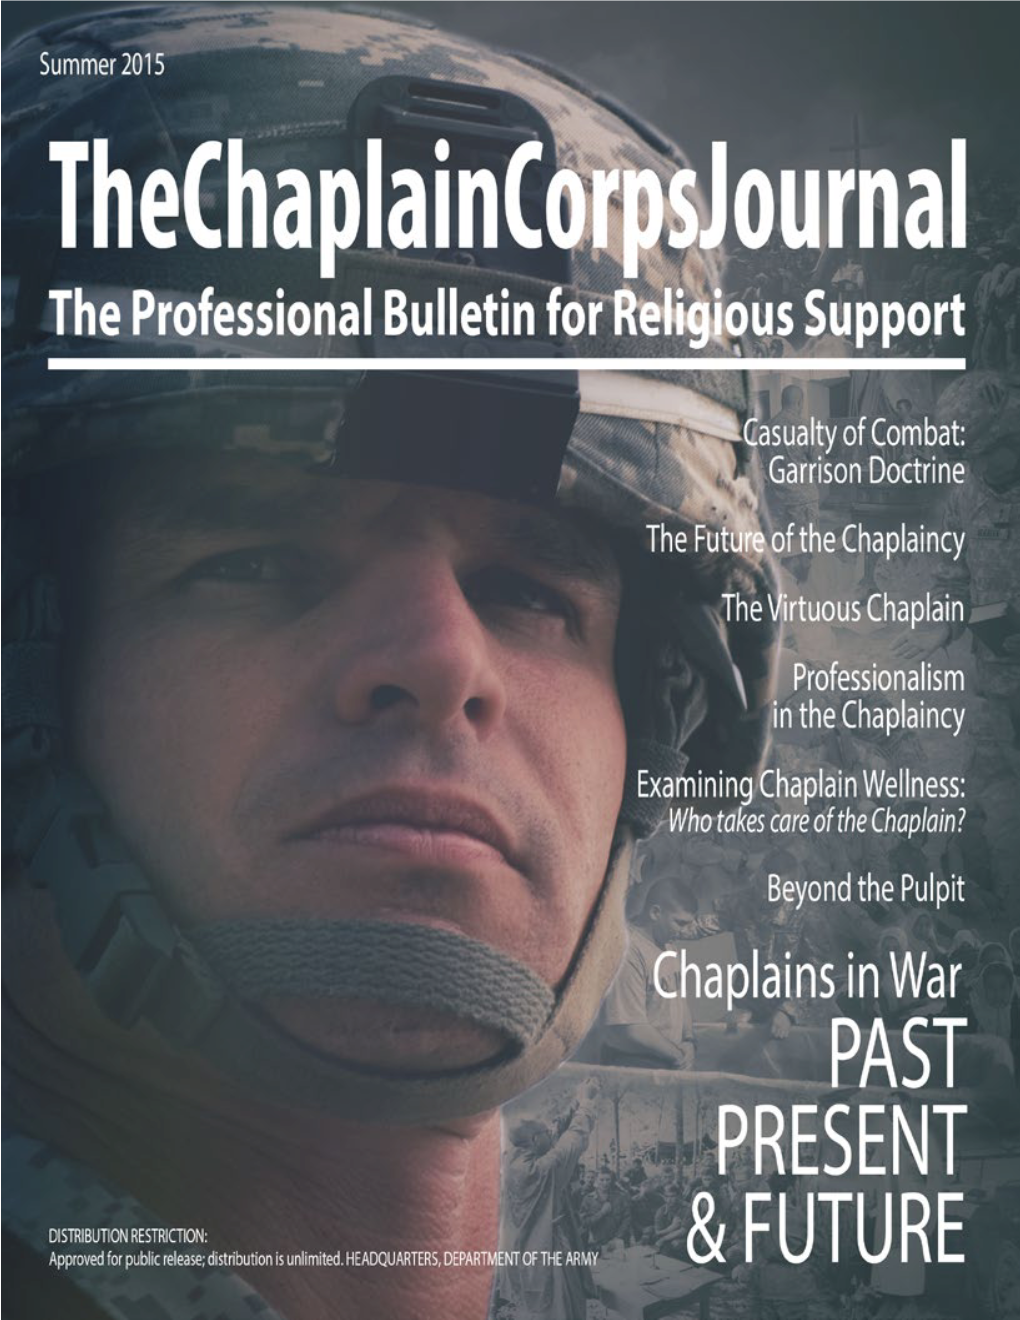 Chaplains at War the Sacrifice of the Four Chaplains in Context